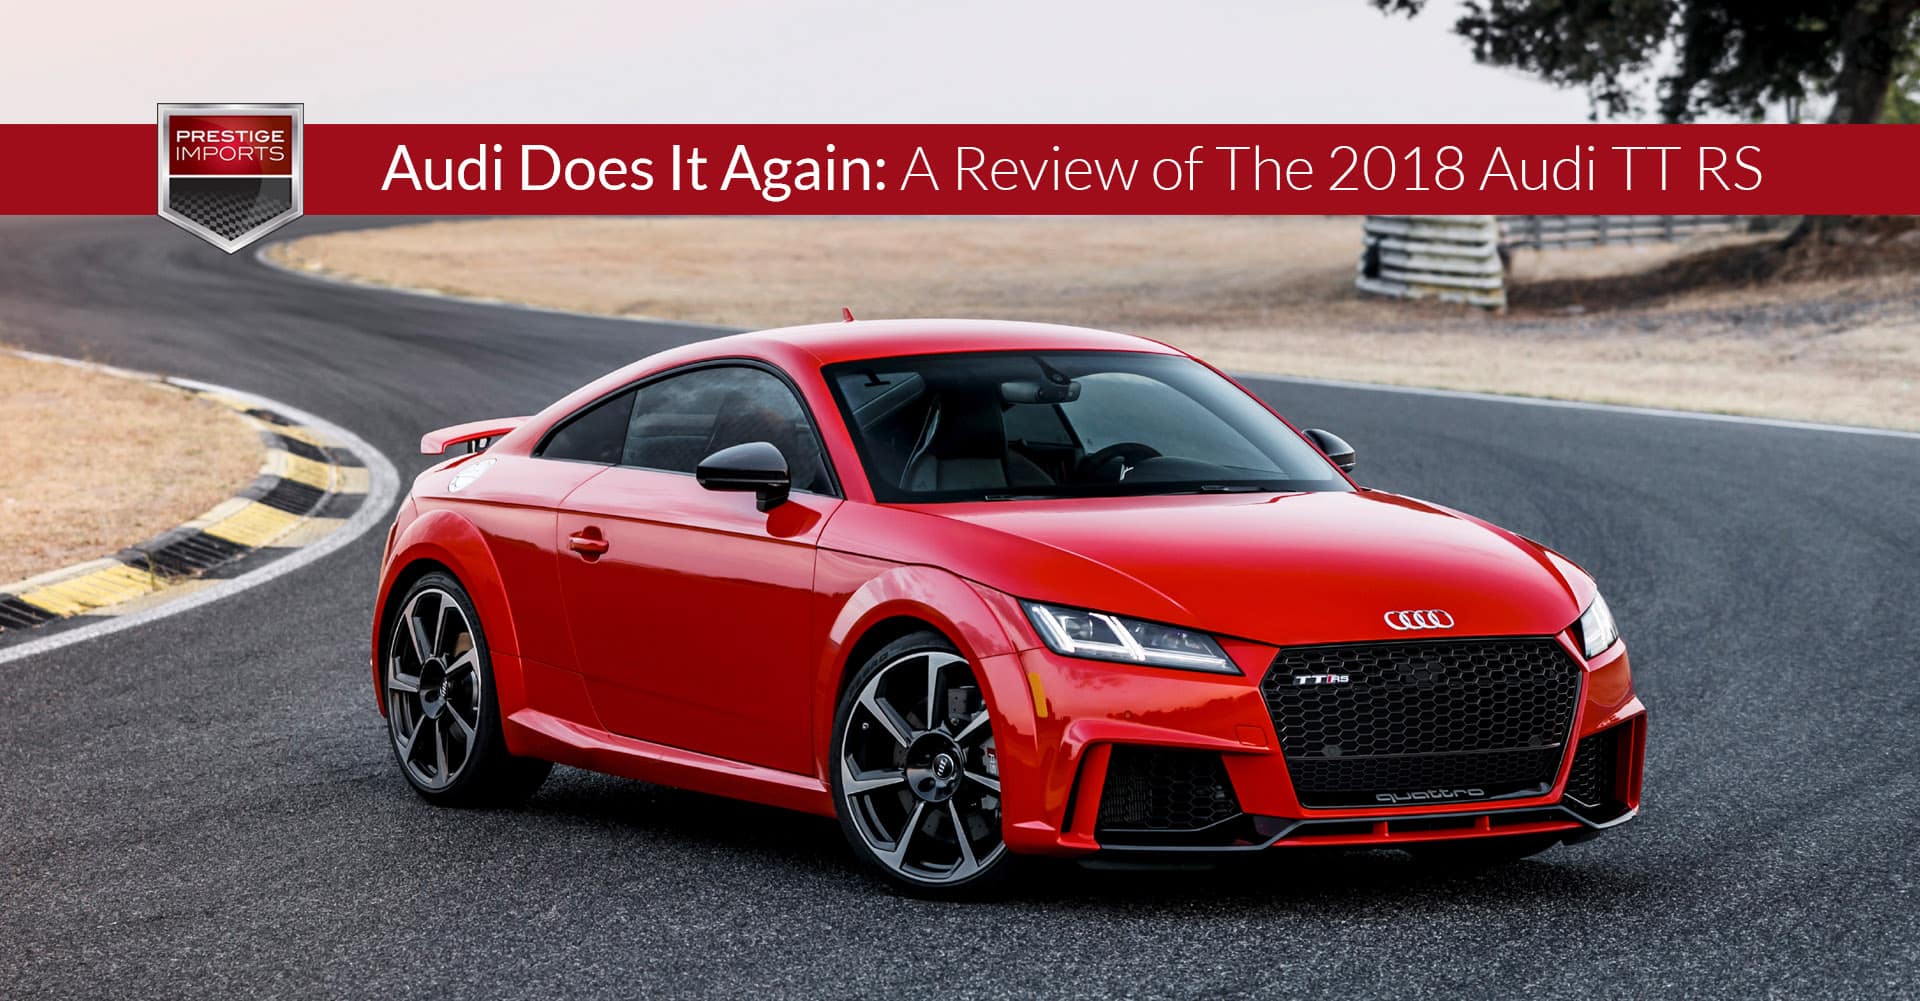 Audi Does It Again: A Review of The 2018 Audi TT RS